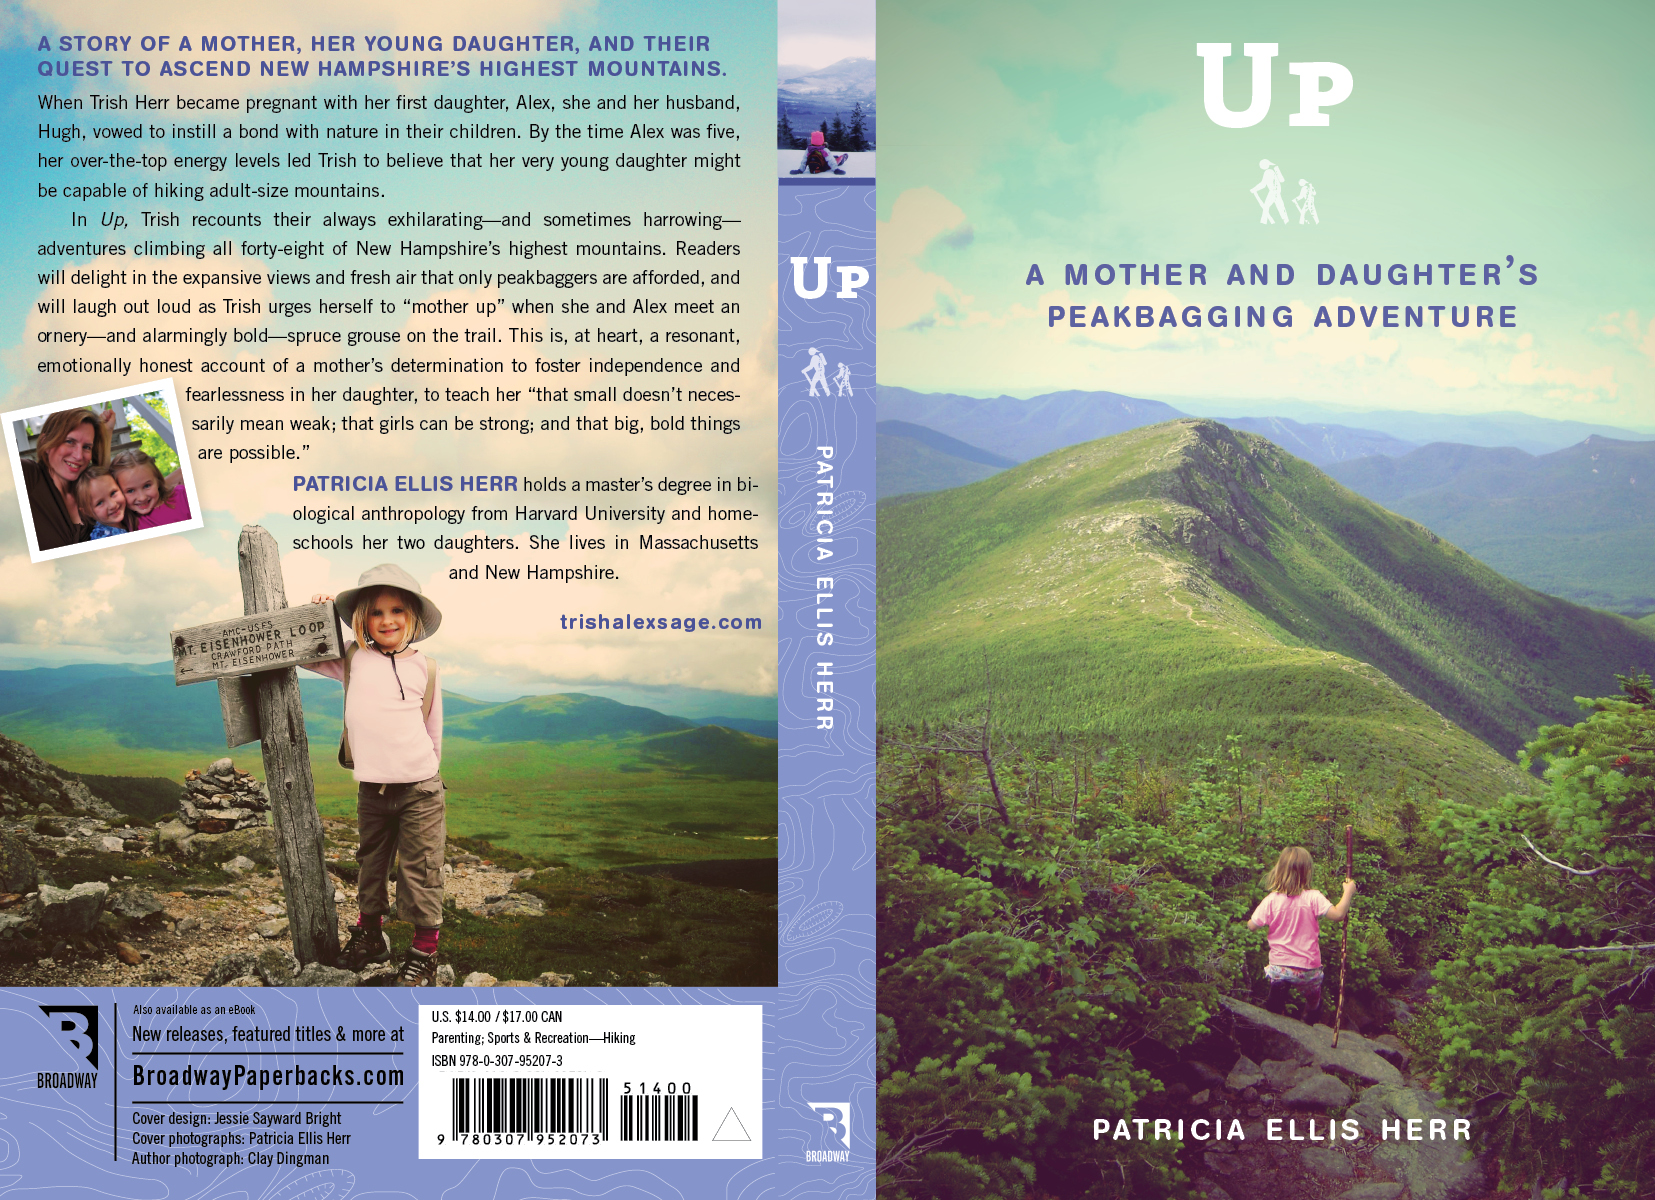 Interview with Patricia Ellis Herr, Author of Up